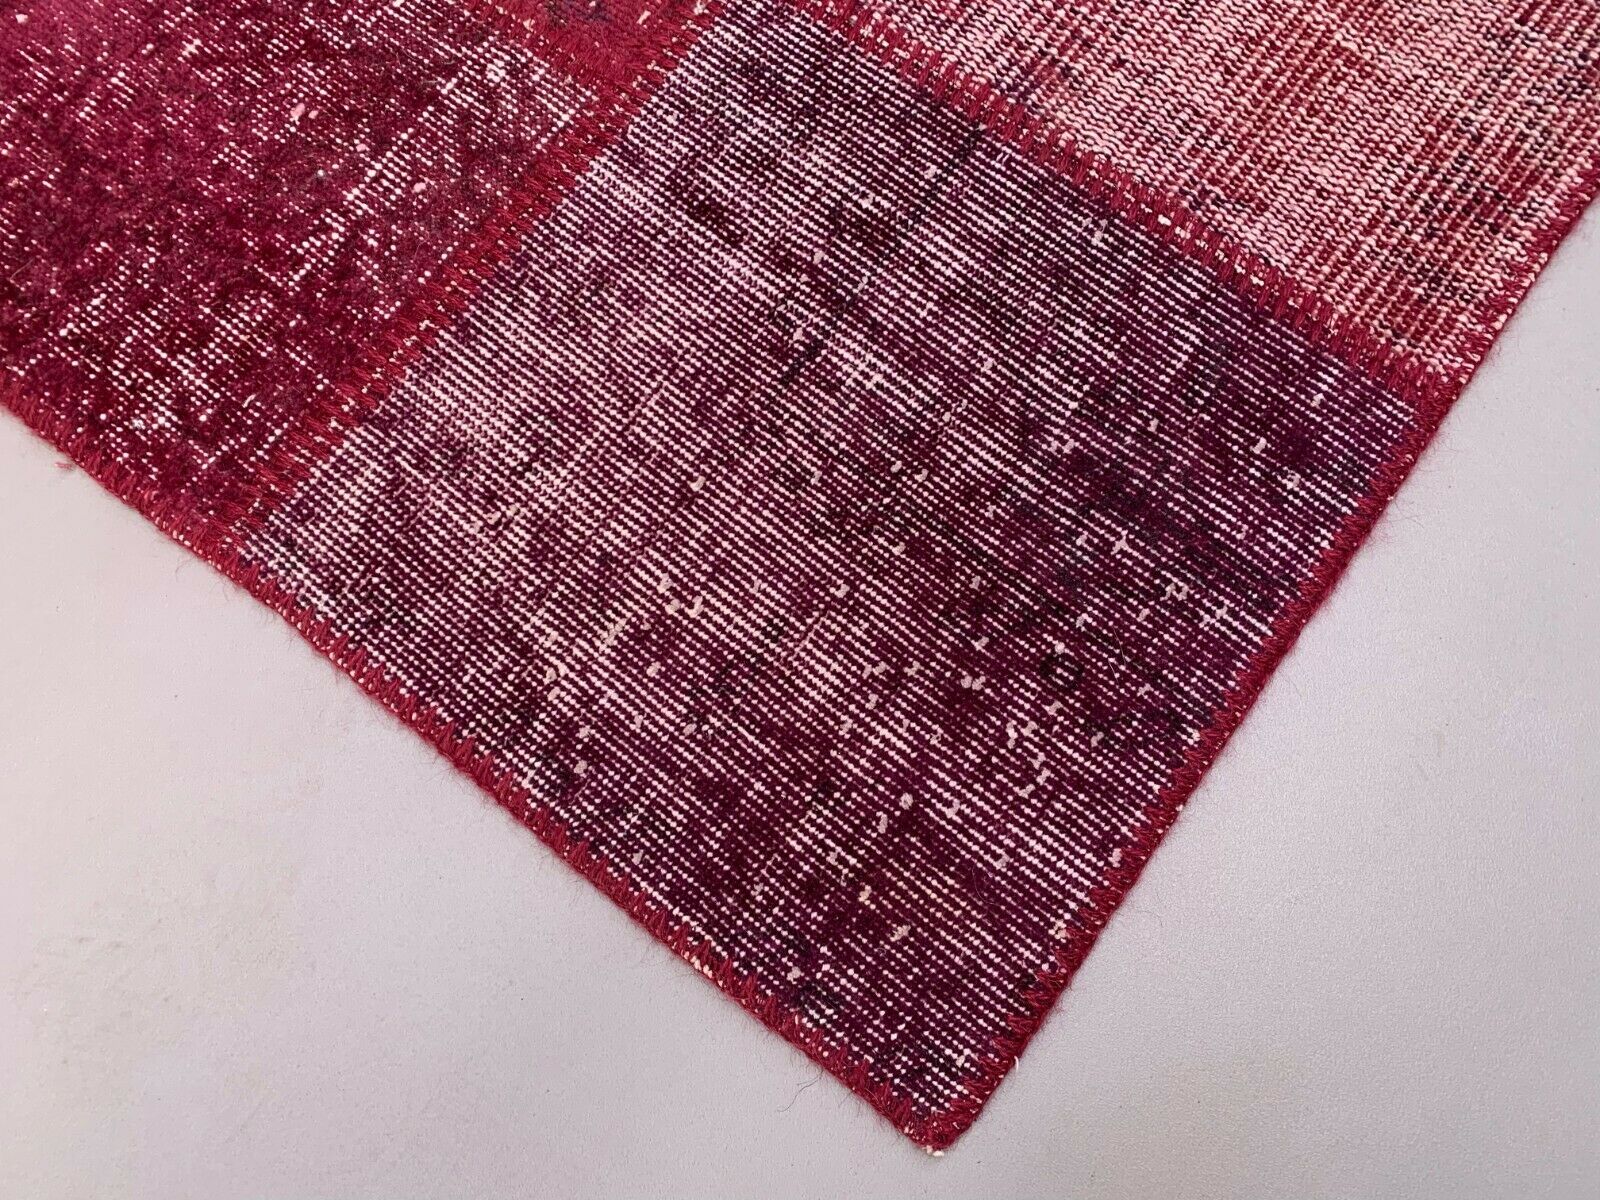 Distressed Turkish Patchwork Rug 240x170 cm wool Vintage shabby Tribal Red Large